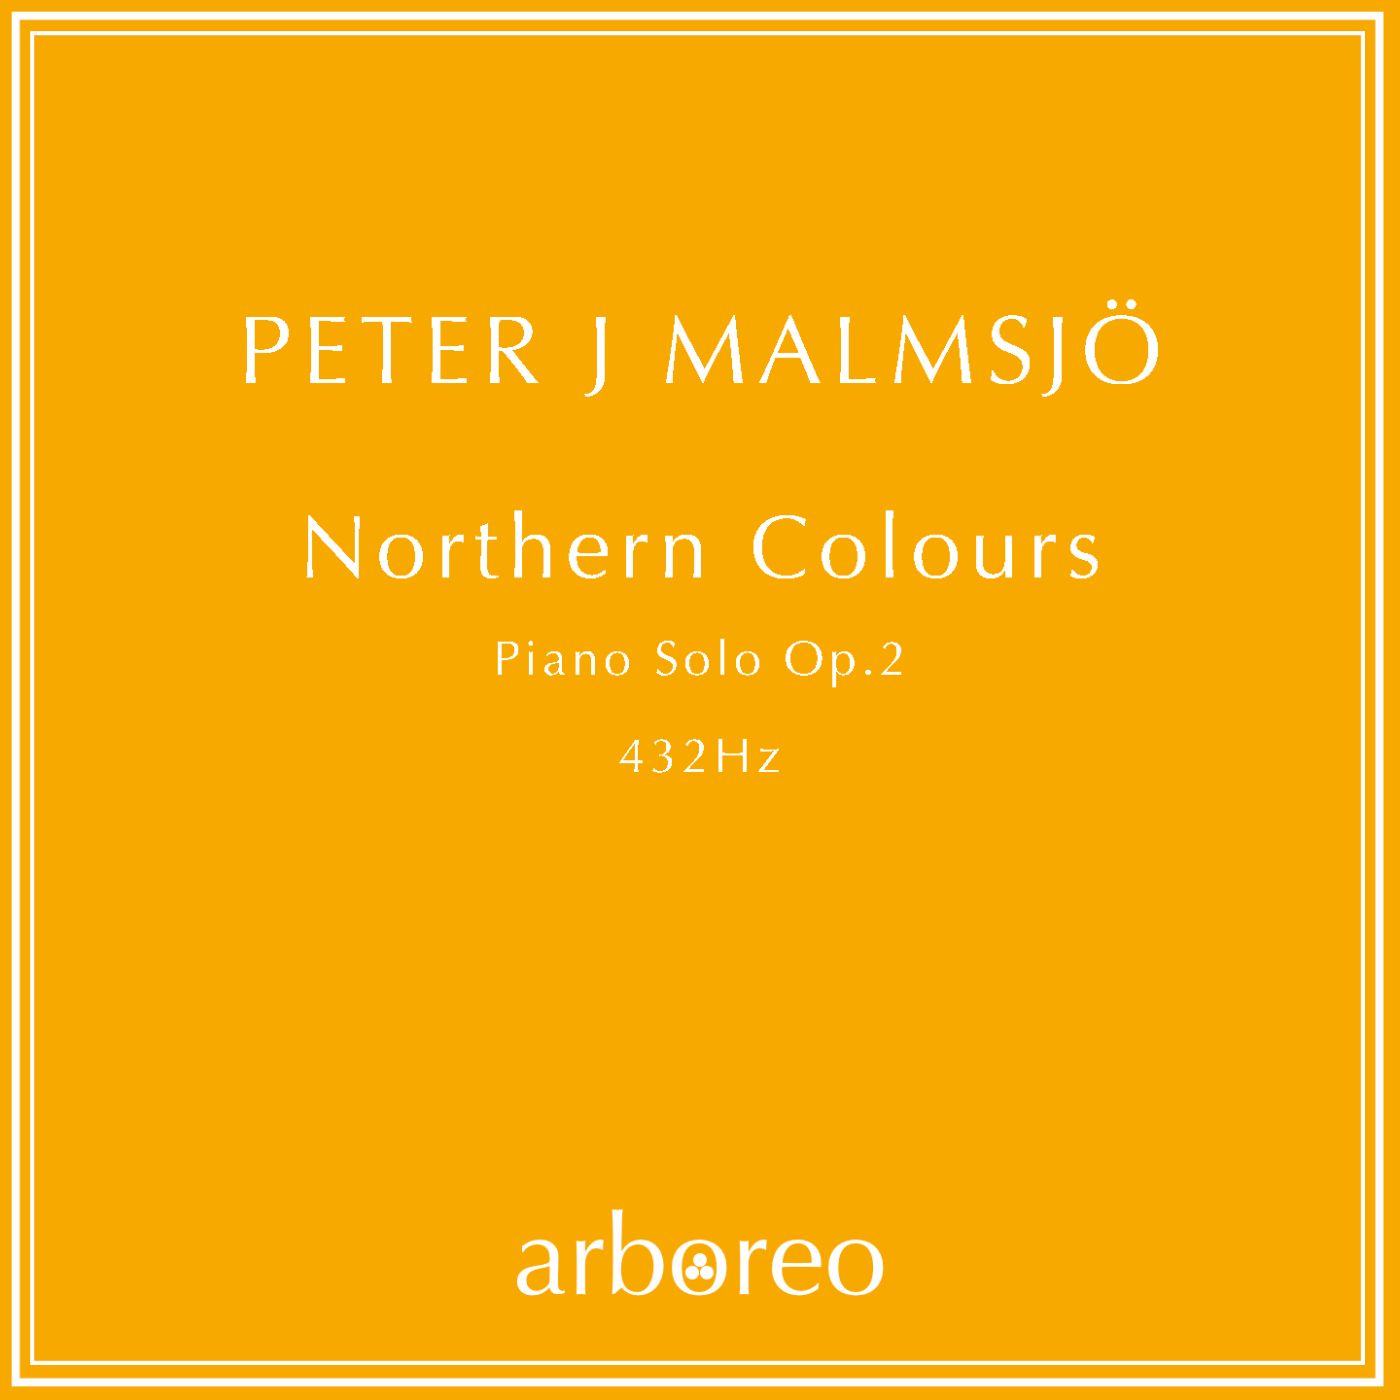 Northern Colours - Piano Solo Op. 2 - 432Hz 